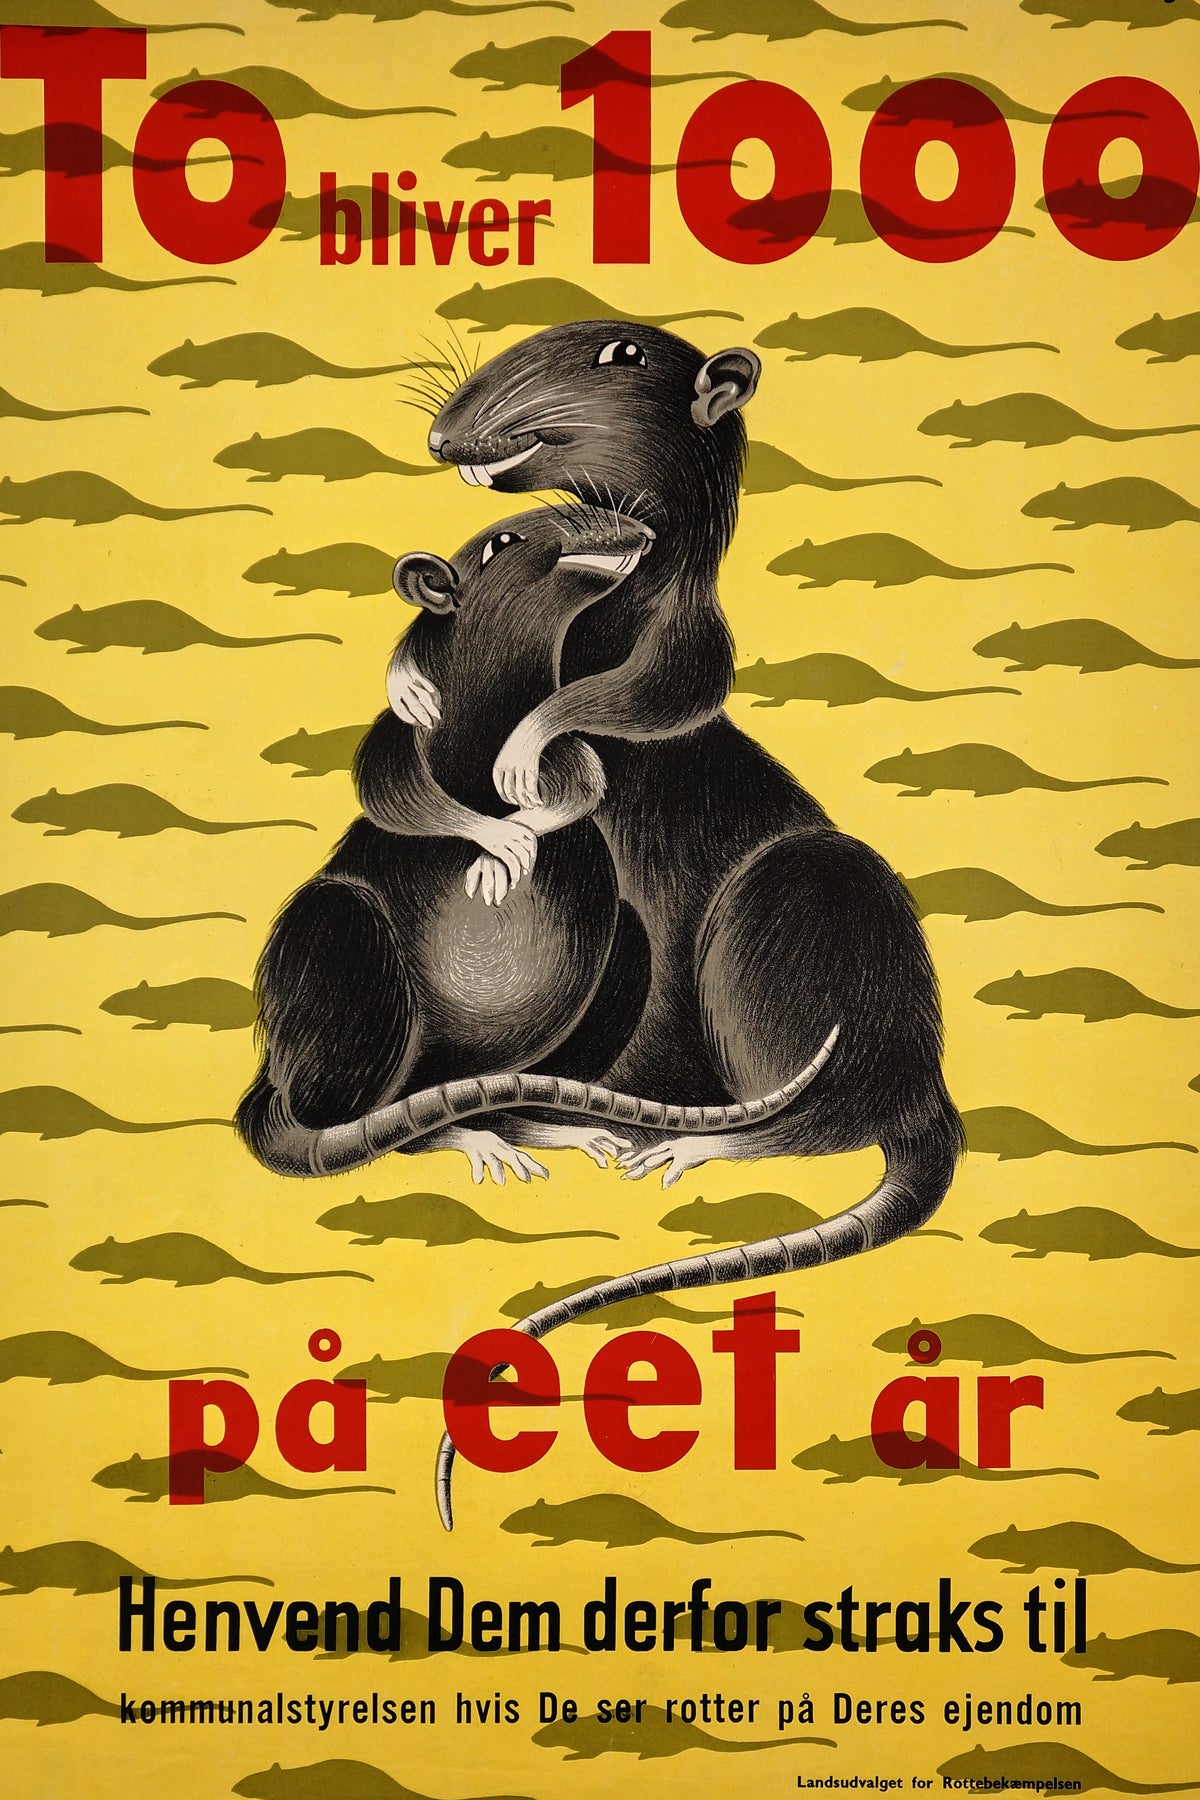 Rats! To Bliver 1000 pa Eet Ar - Authentic Vintage Poster